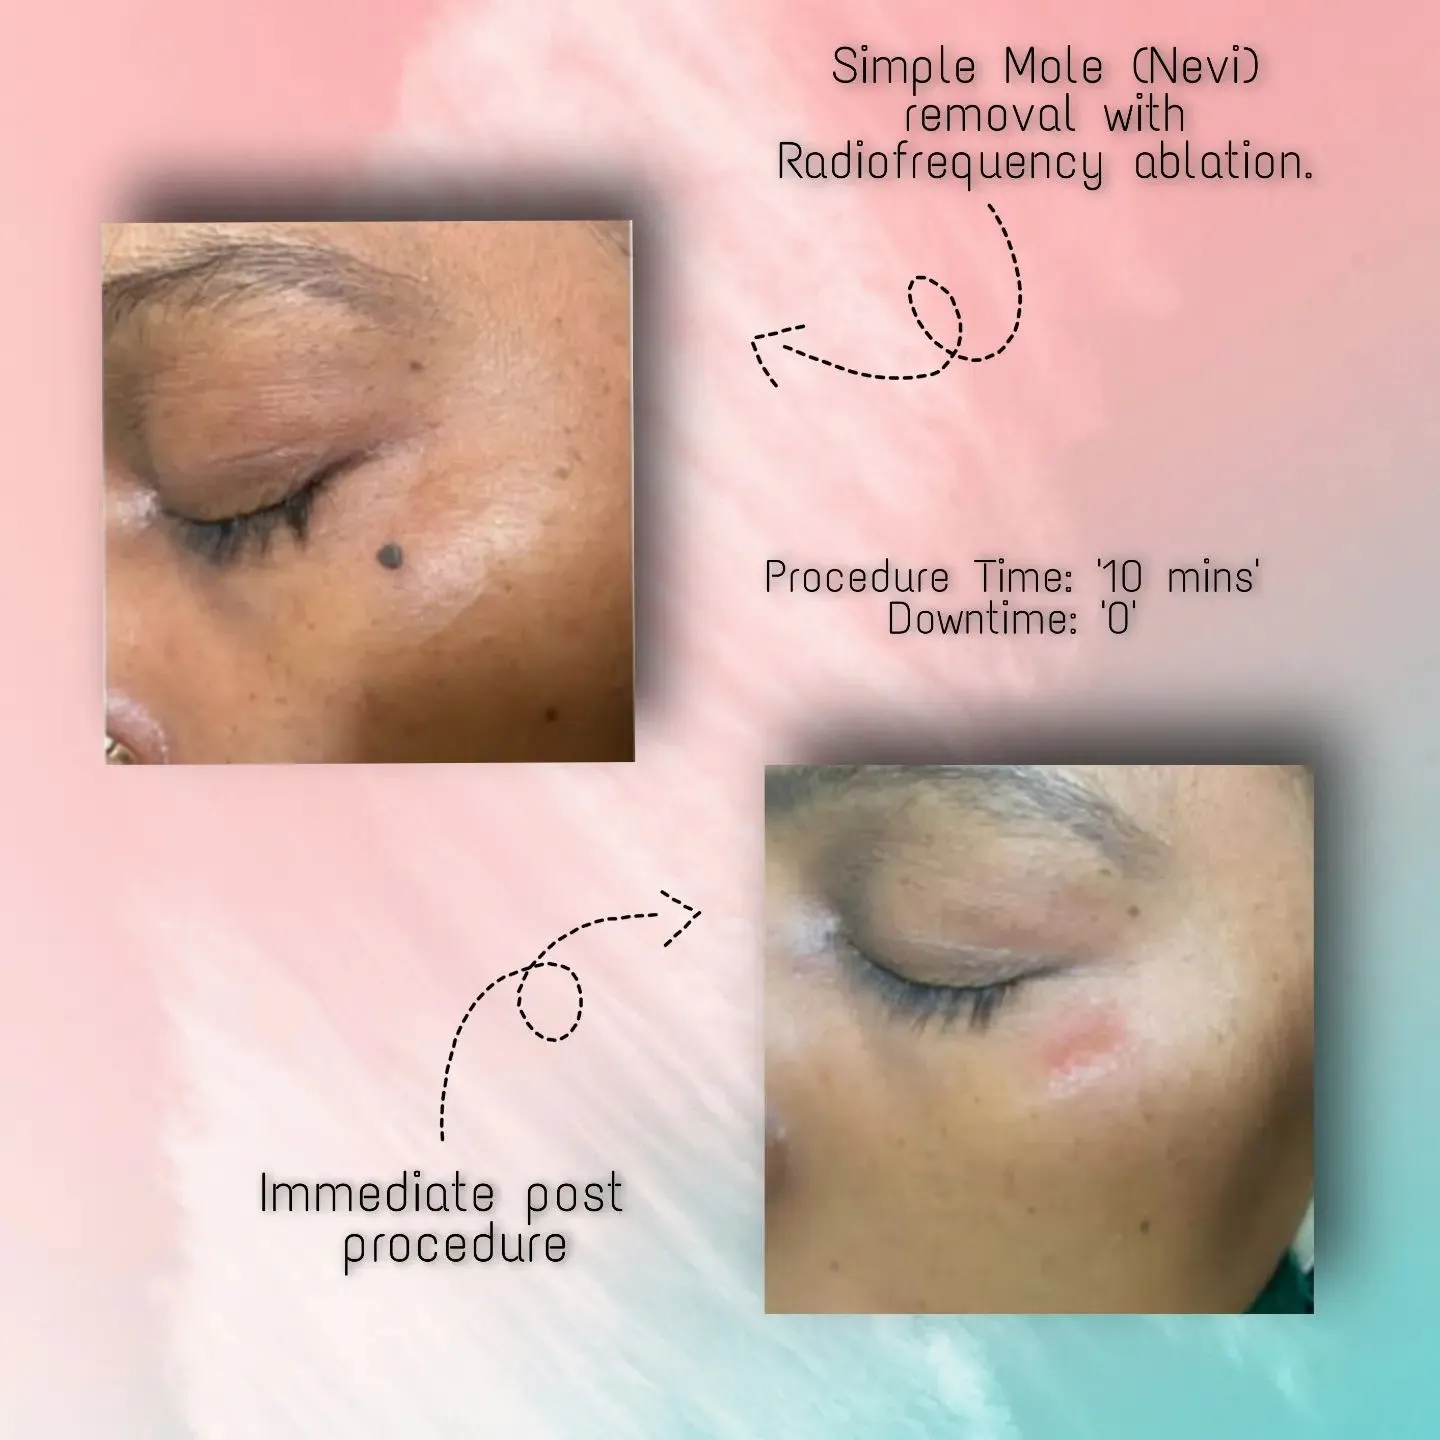 Simple Mole (Nevi) removal with Radiofrequency ablation